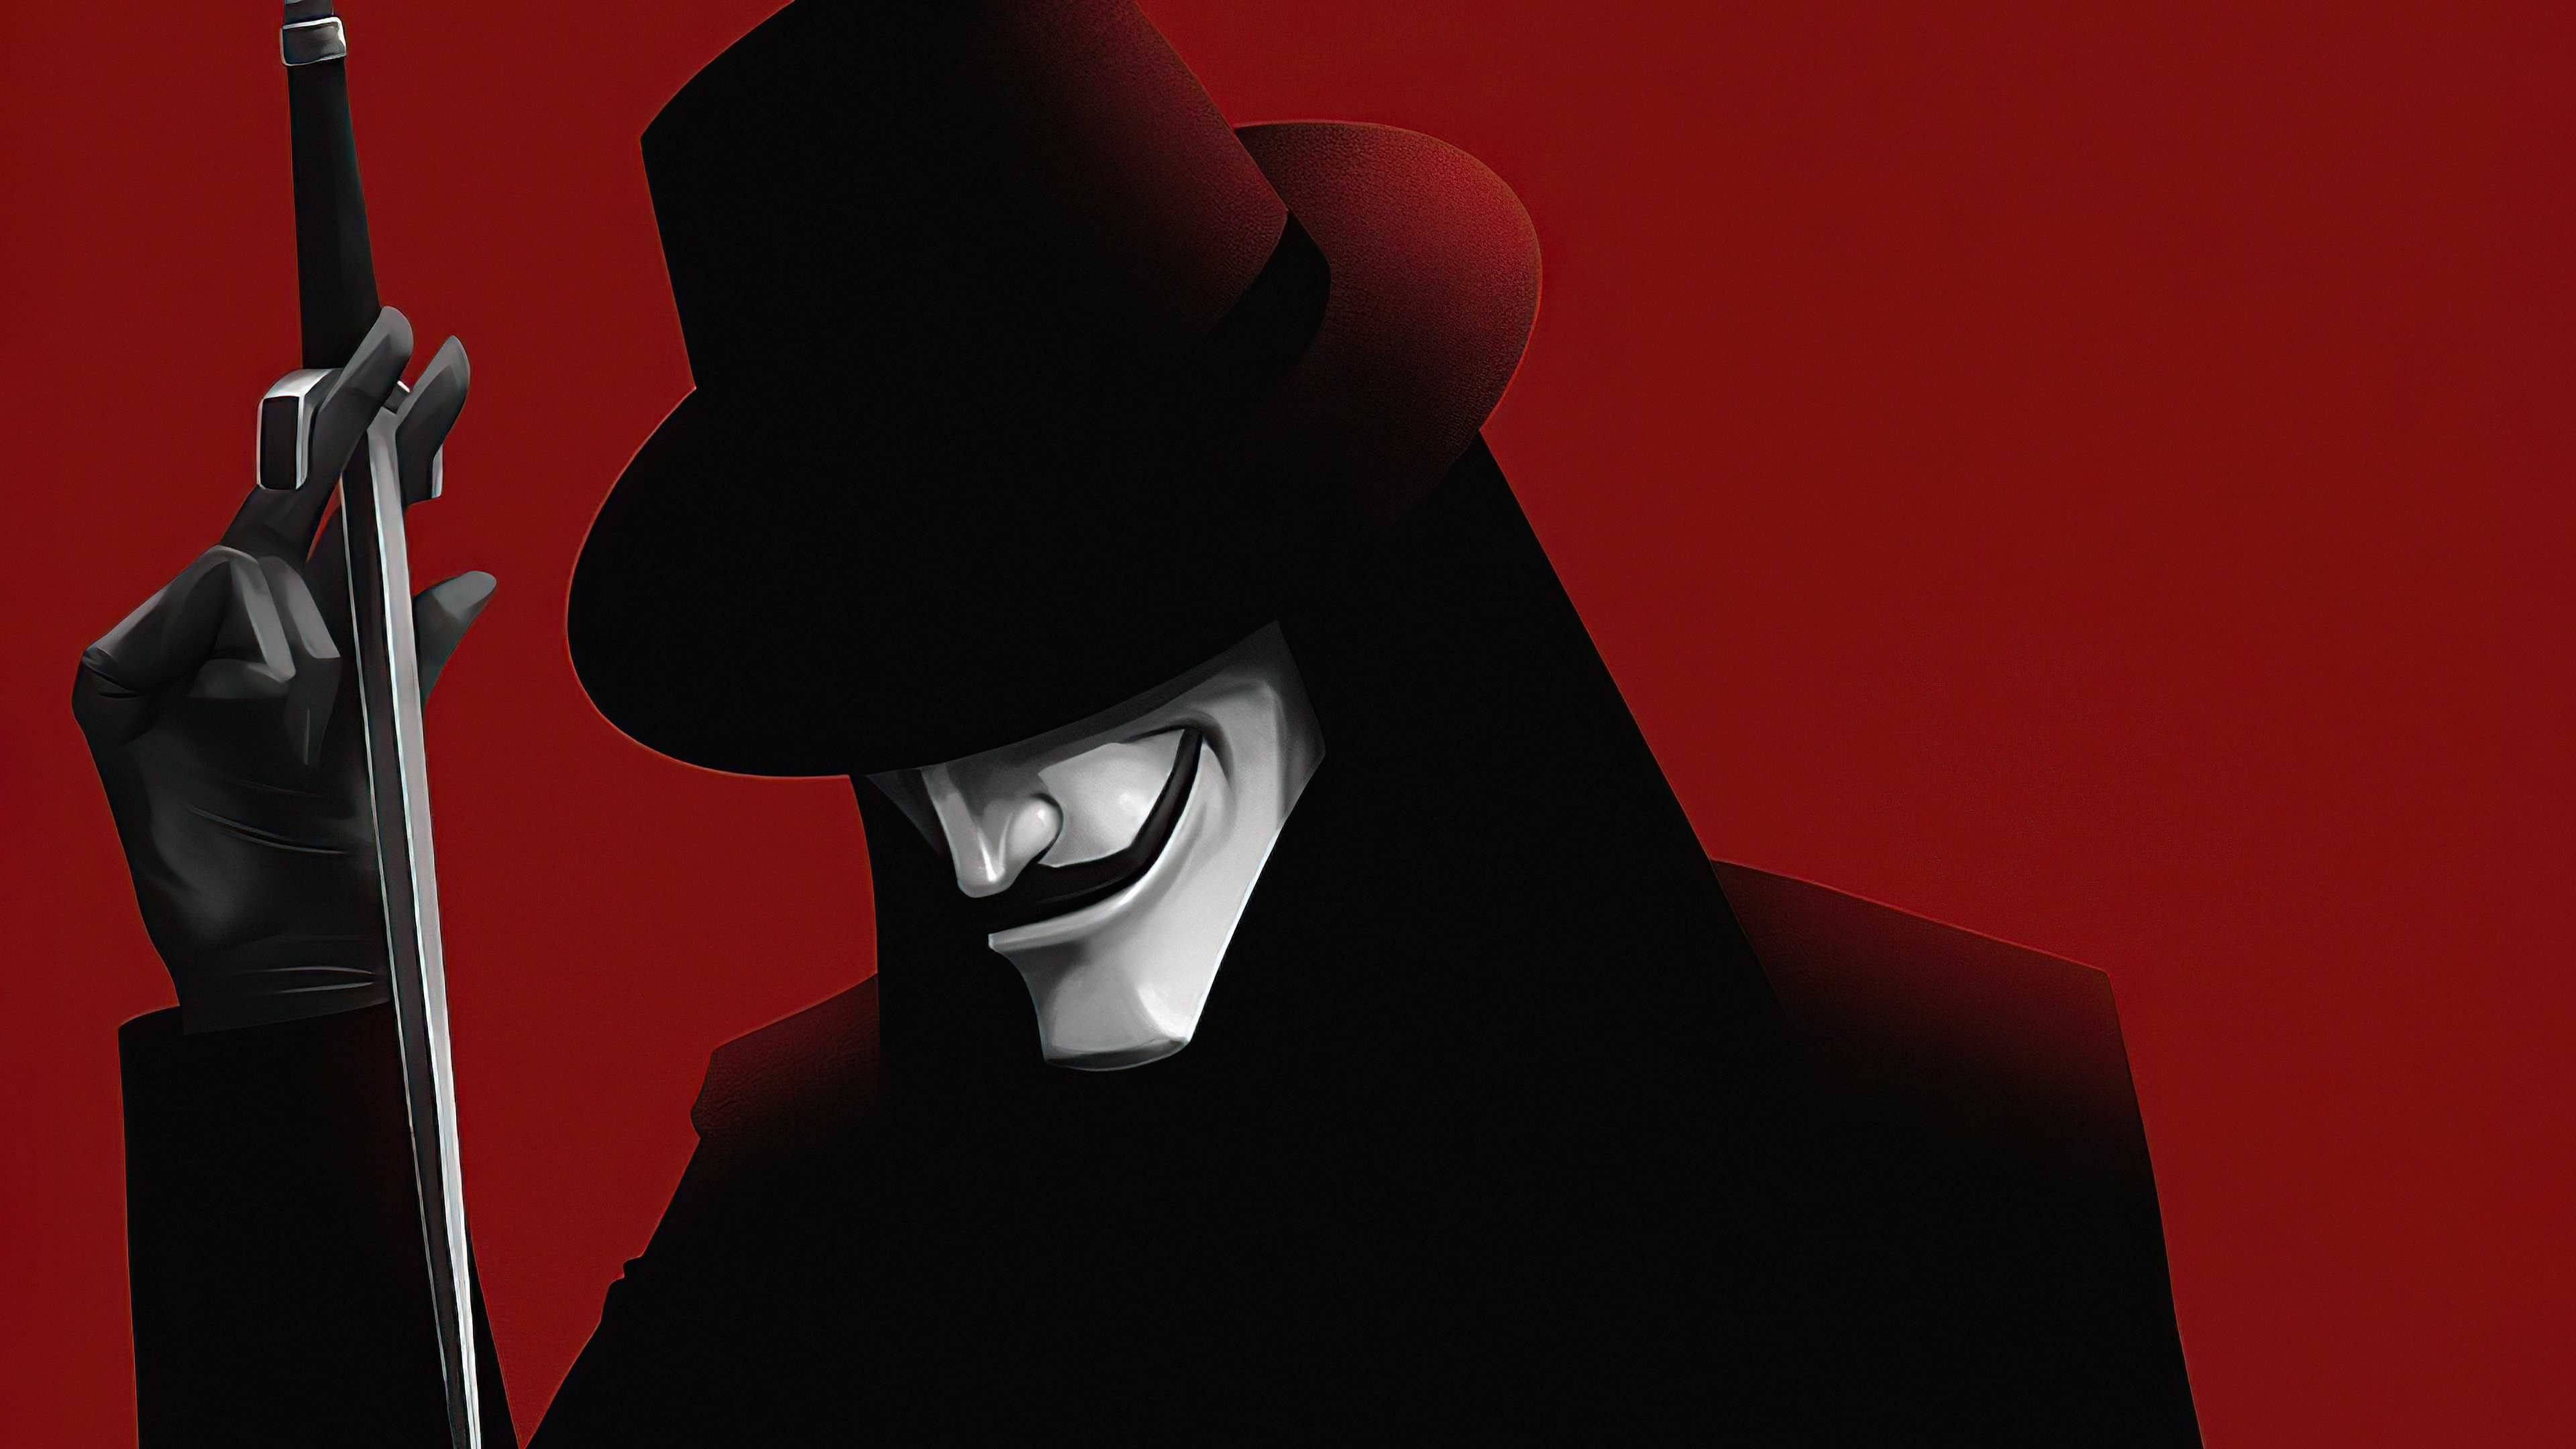 3840x2160 2048x1152 V For Vendetta In Love 4k 2048x1152 Resolution HD 4k Wallpapers, Images, Backgrounds, Photos and Pictures